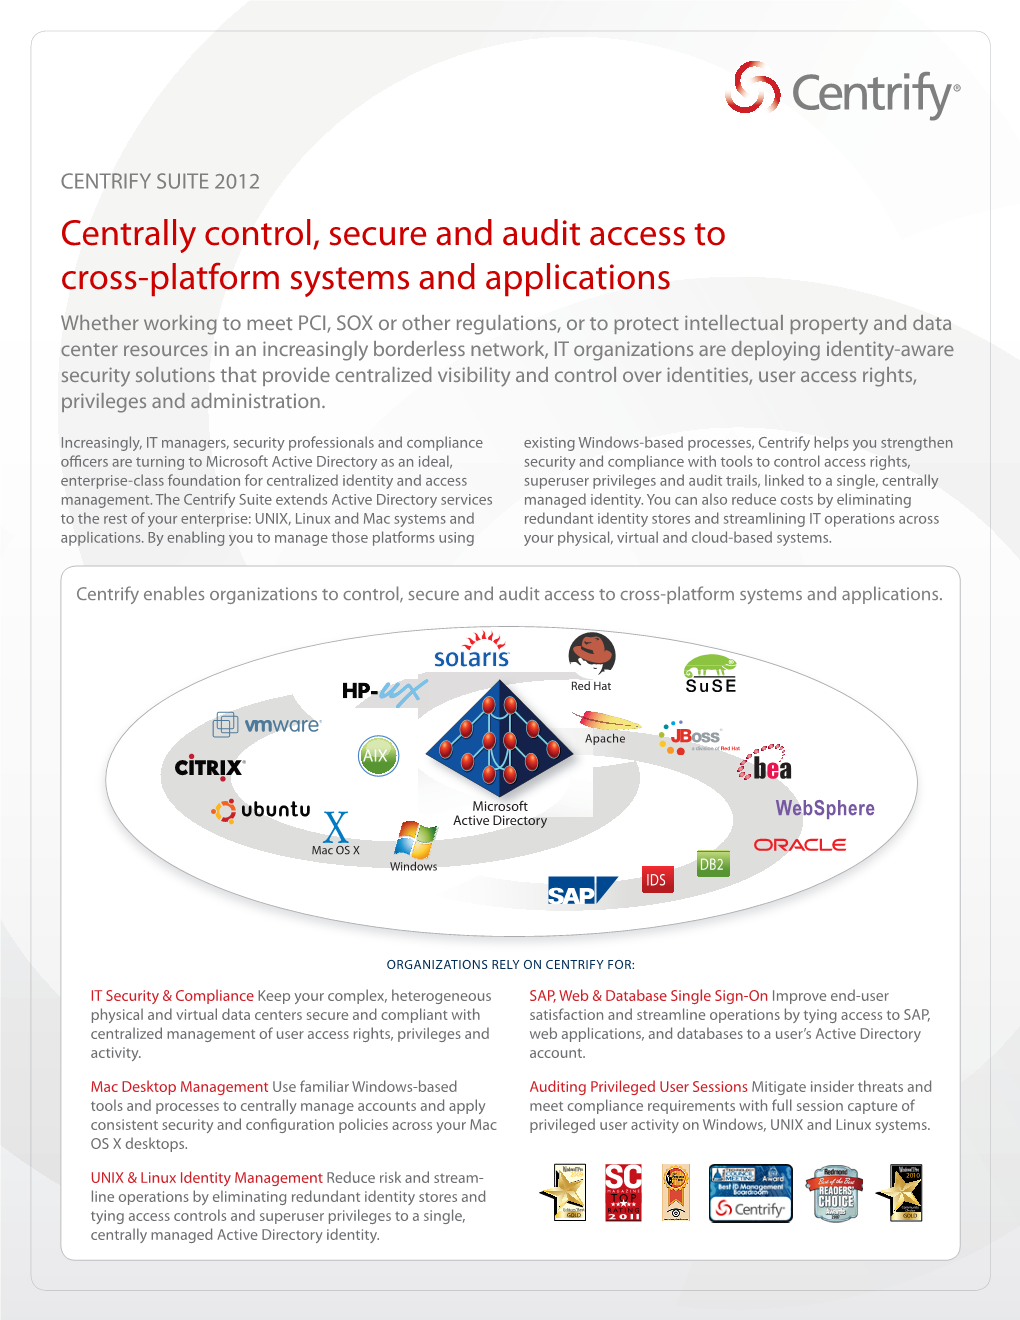 Centrally Control, Secure and Audit Access to Cross-Platform Systems and Applications